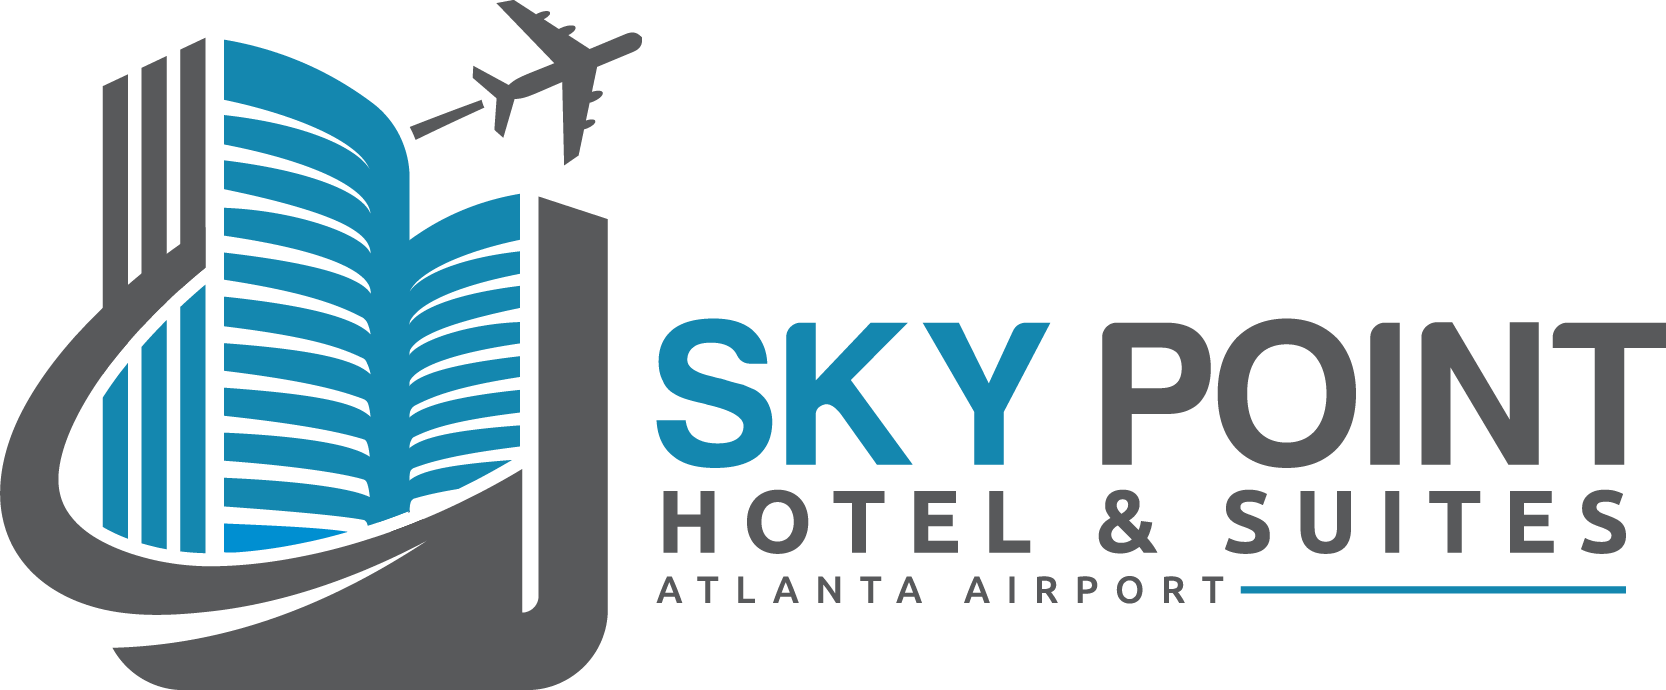 Sky Point Hotel And Suites Atlanta Airport Atl Parking One Stop Parking